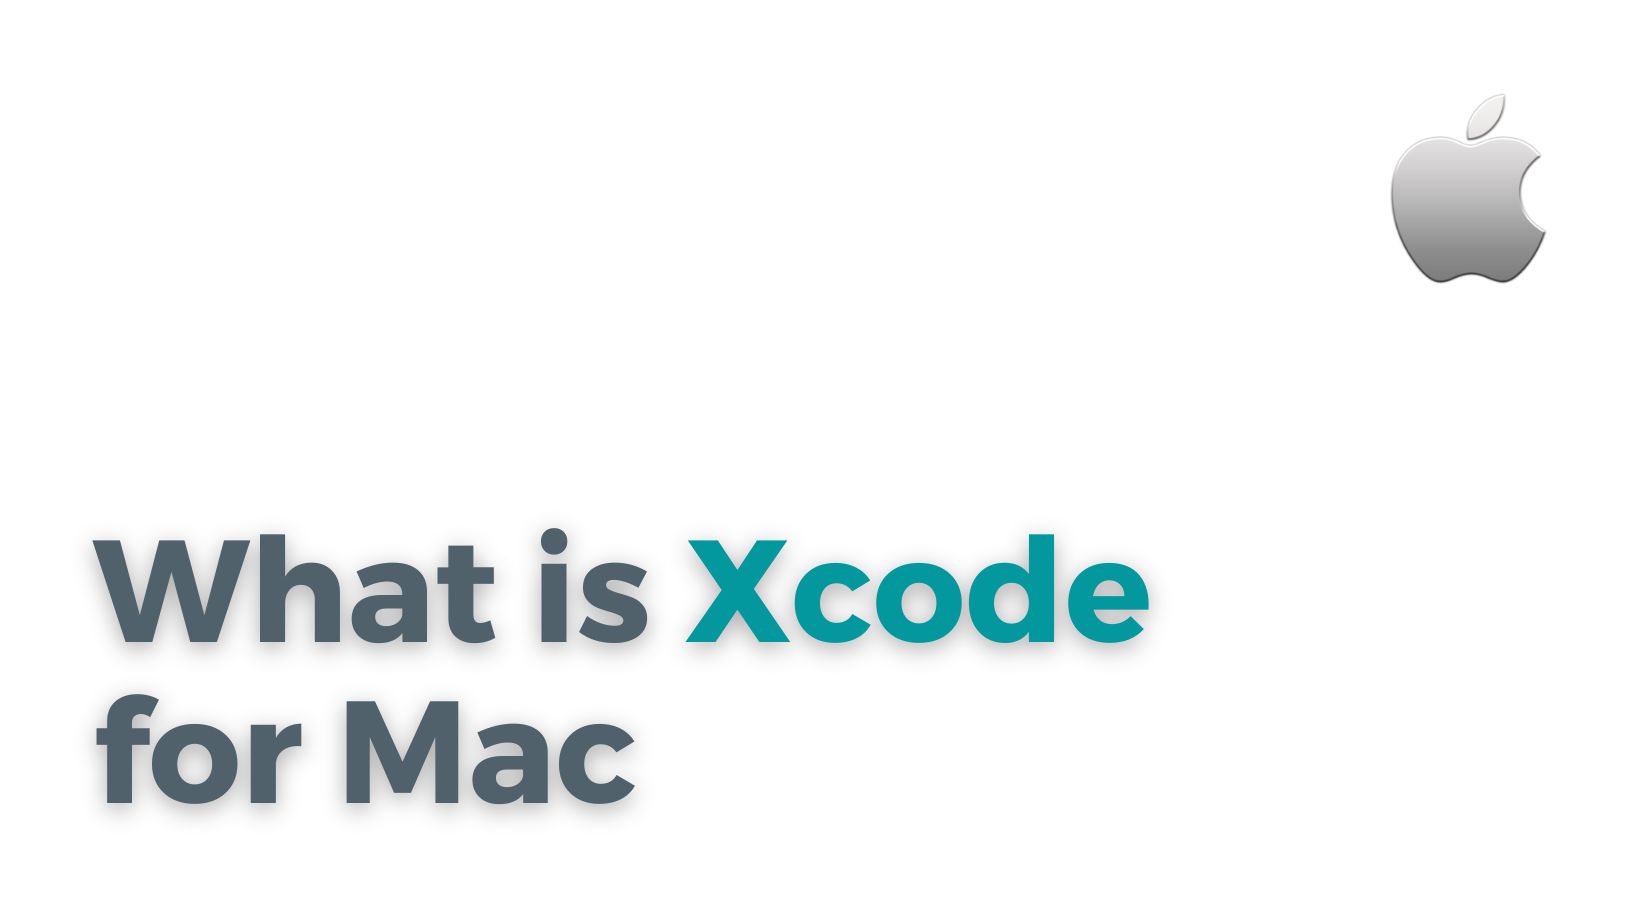 What is Xcode for Mac